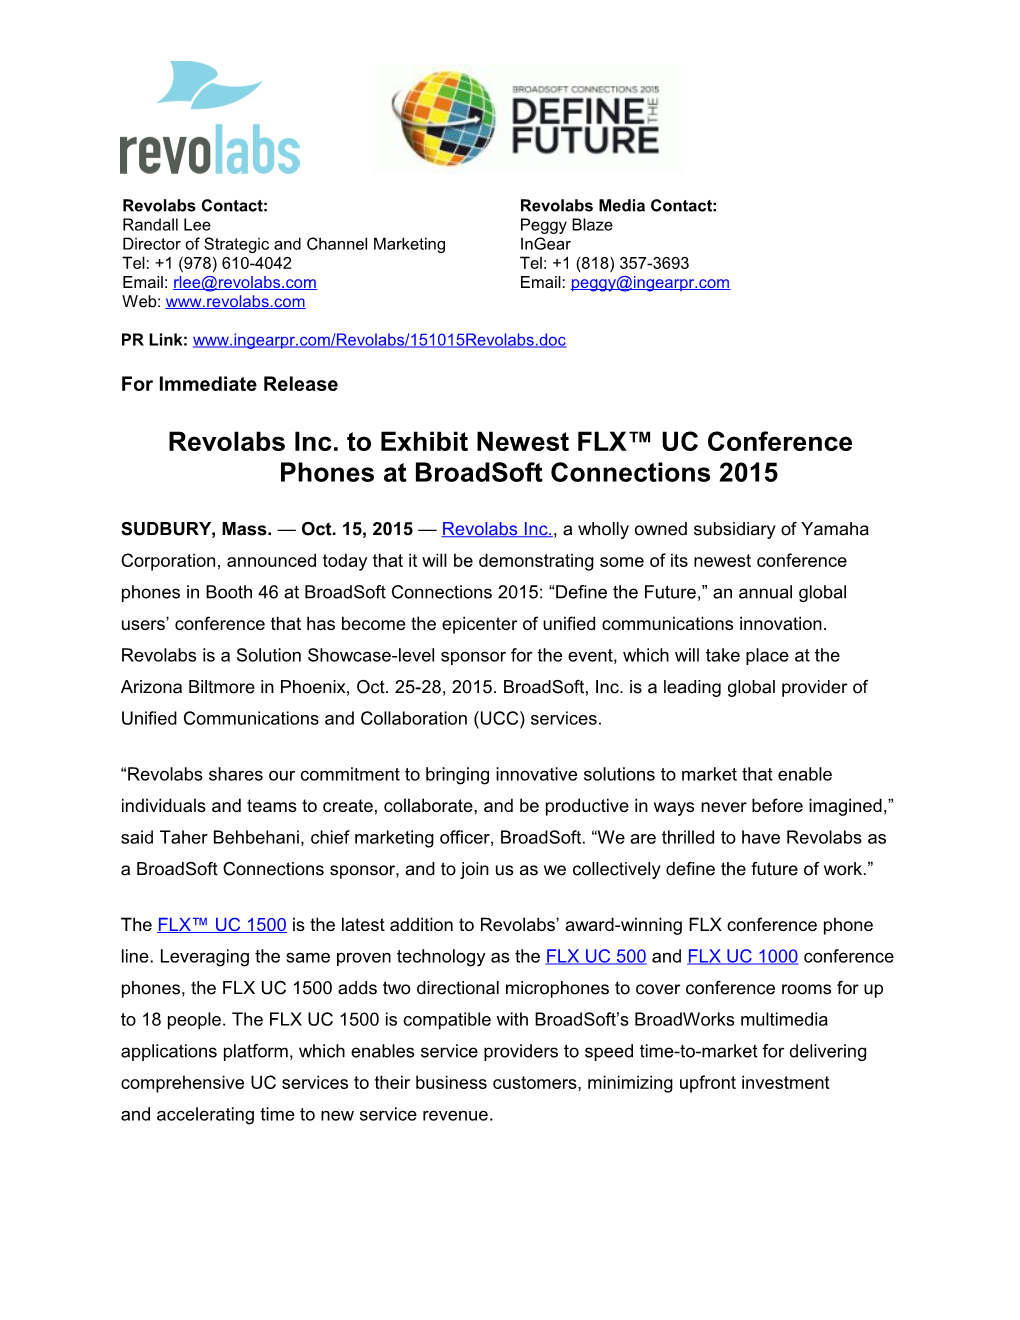 Revolabs Inc. to Exhibit Newest FLX UC Conference Phonesat Broadsoft Connections 2015